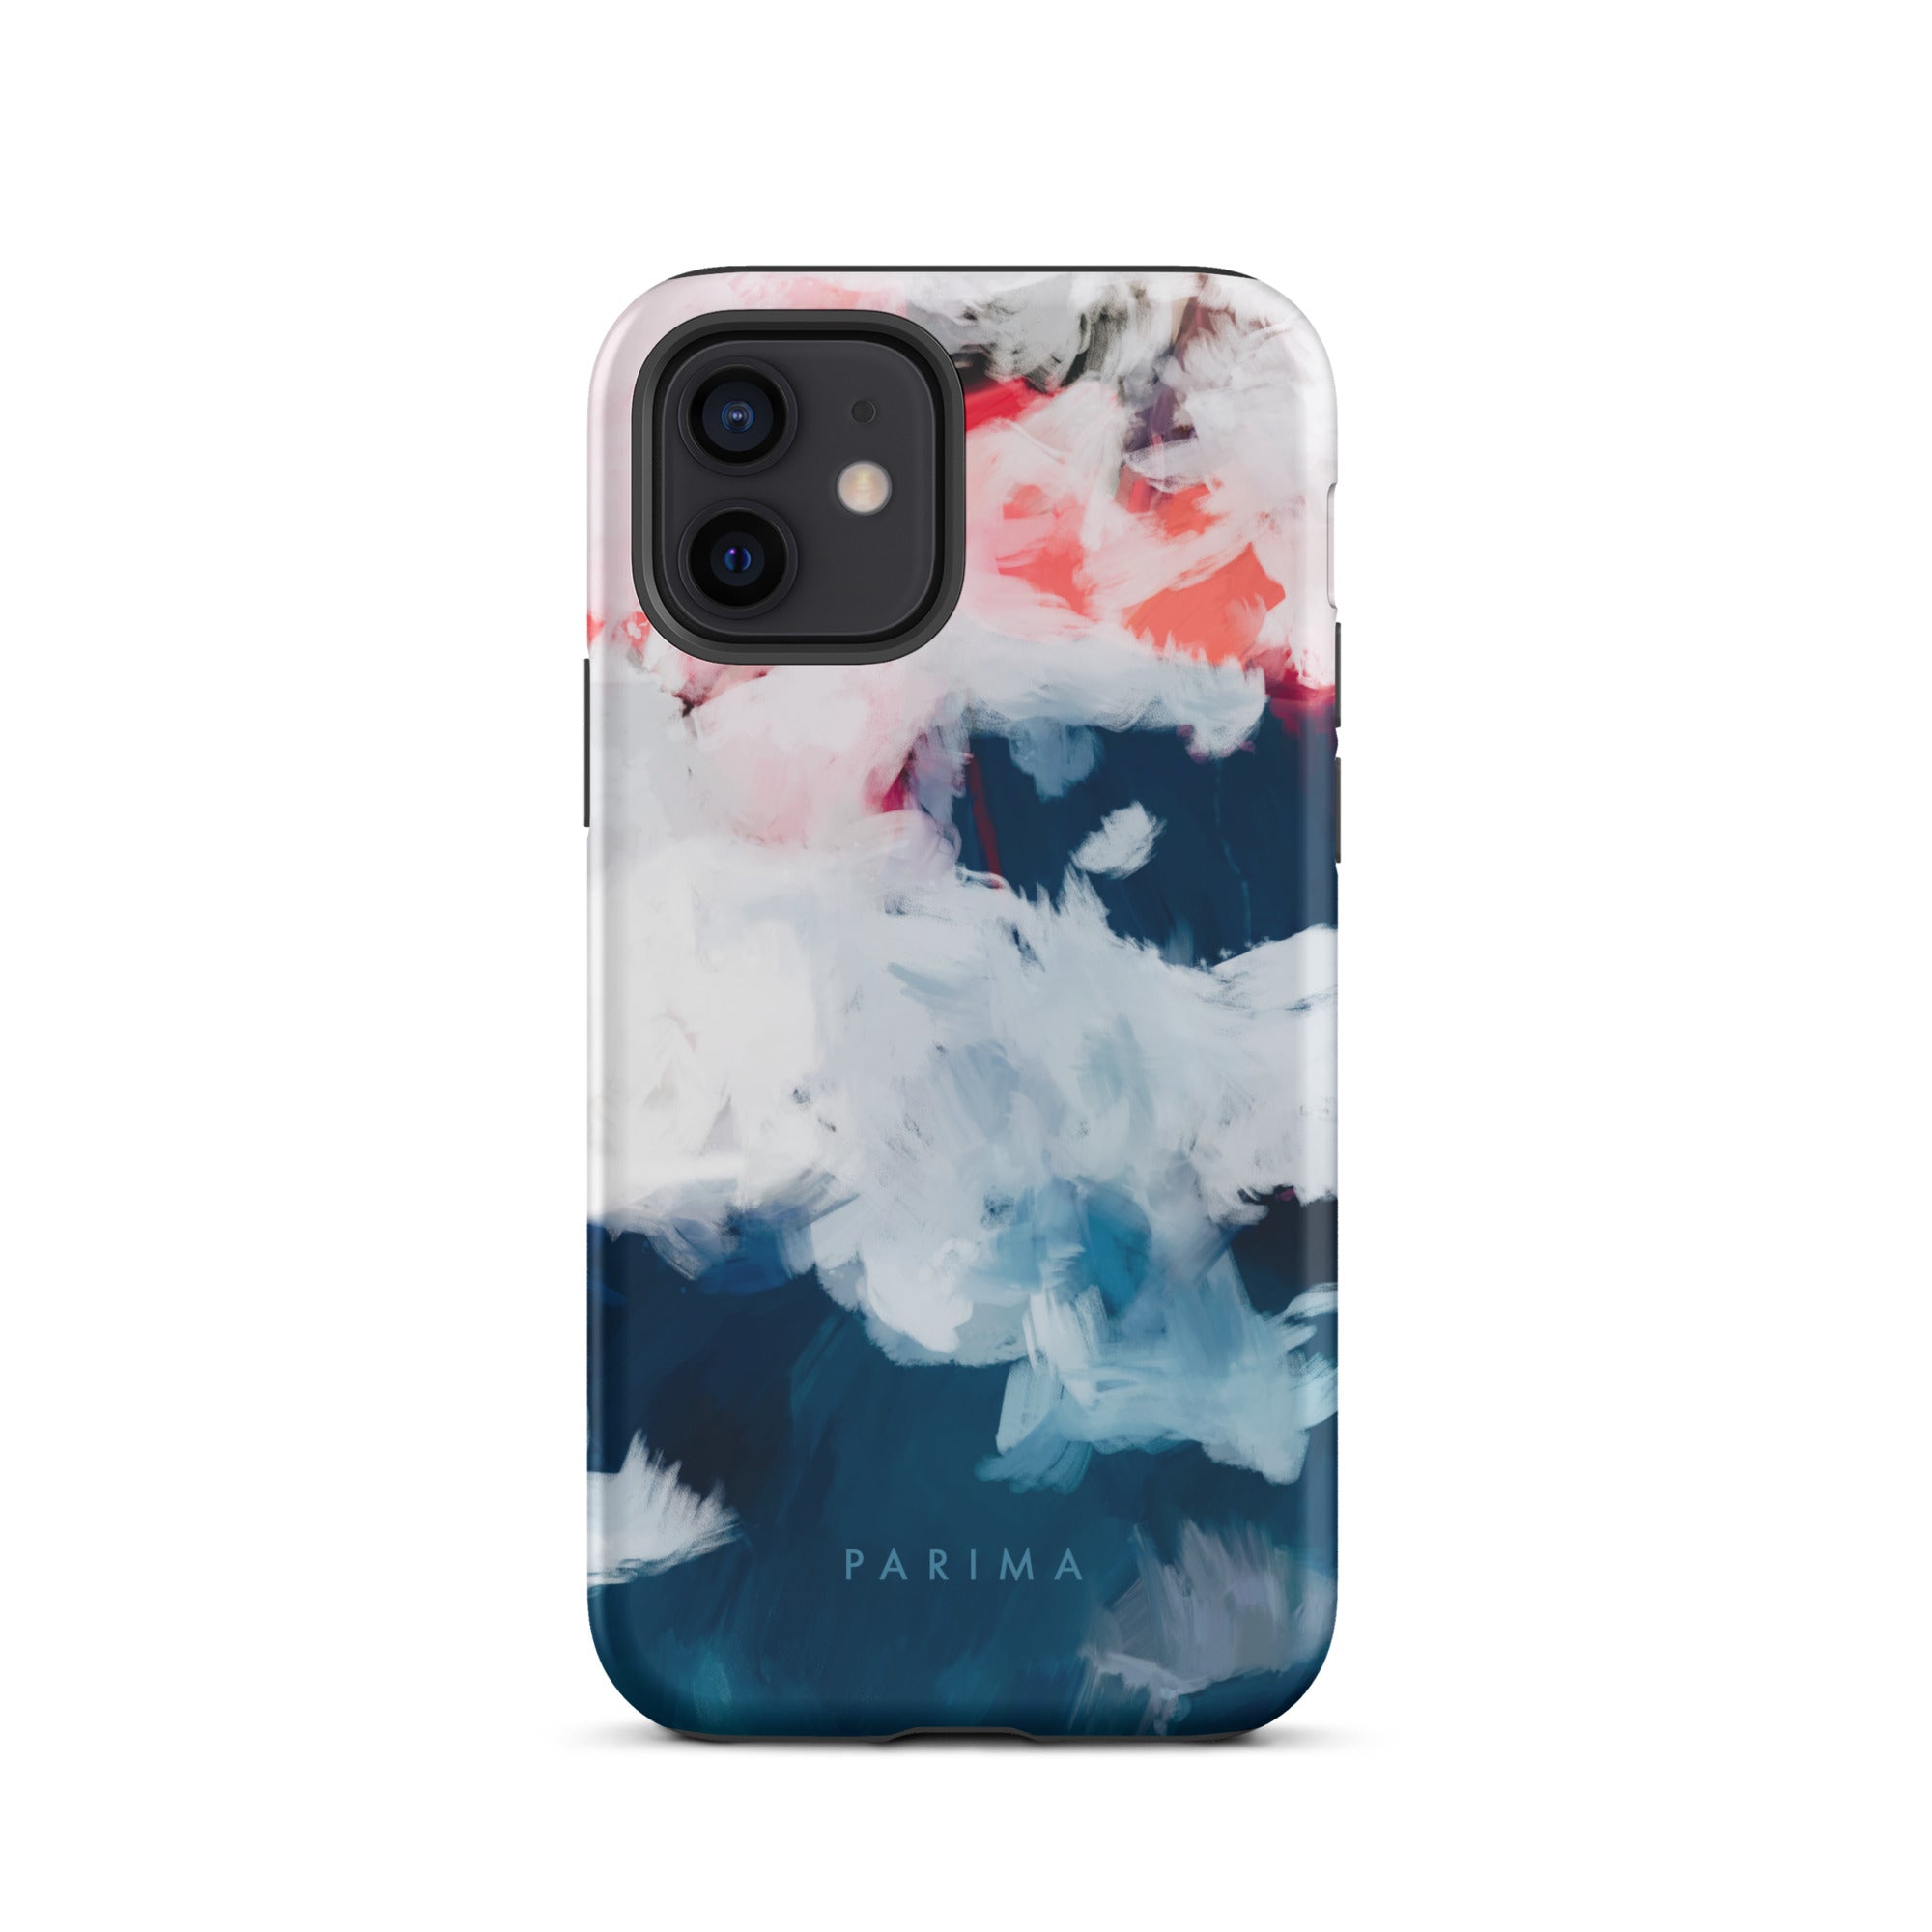 Oceane, blue and pink abstract art on iPhone 12 tough case by Parima Studio